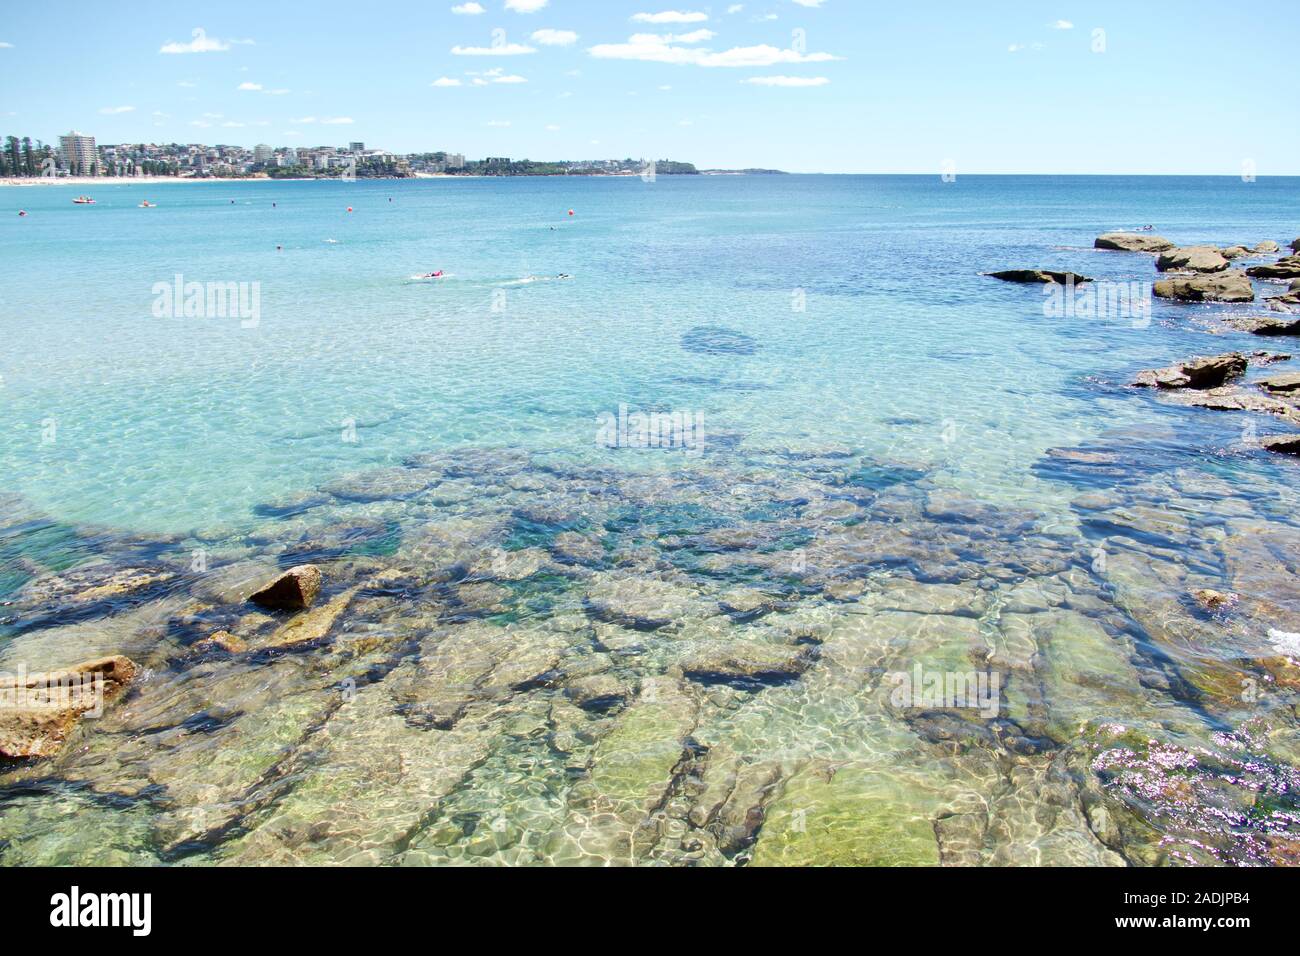 Shelly Beach and Manly Beach, Sydney, New South Wales, Australia, Australasia Stock Photo